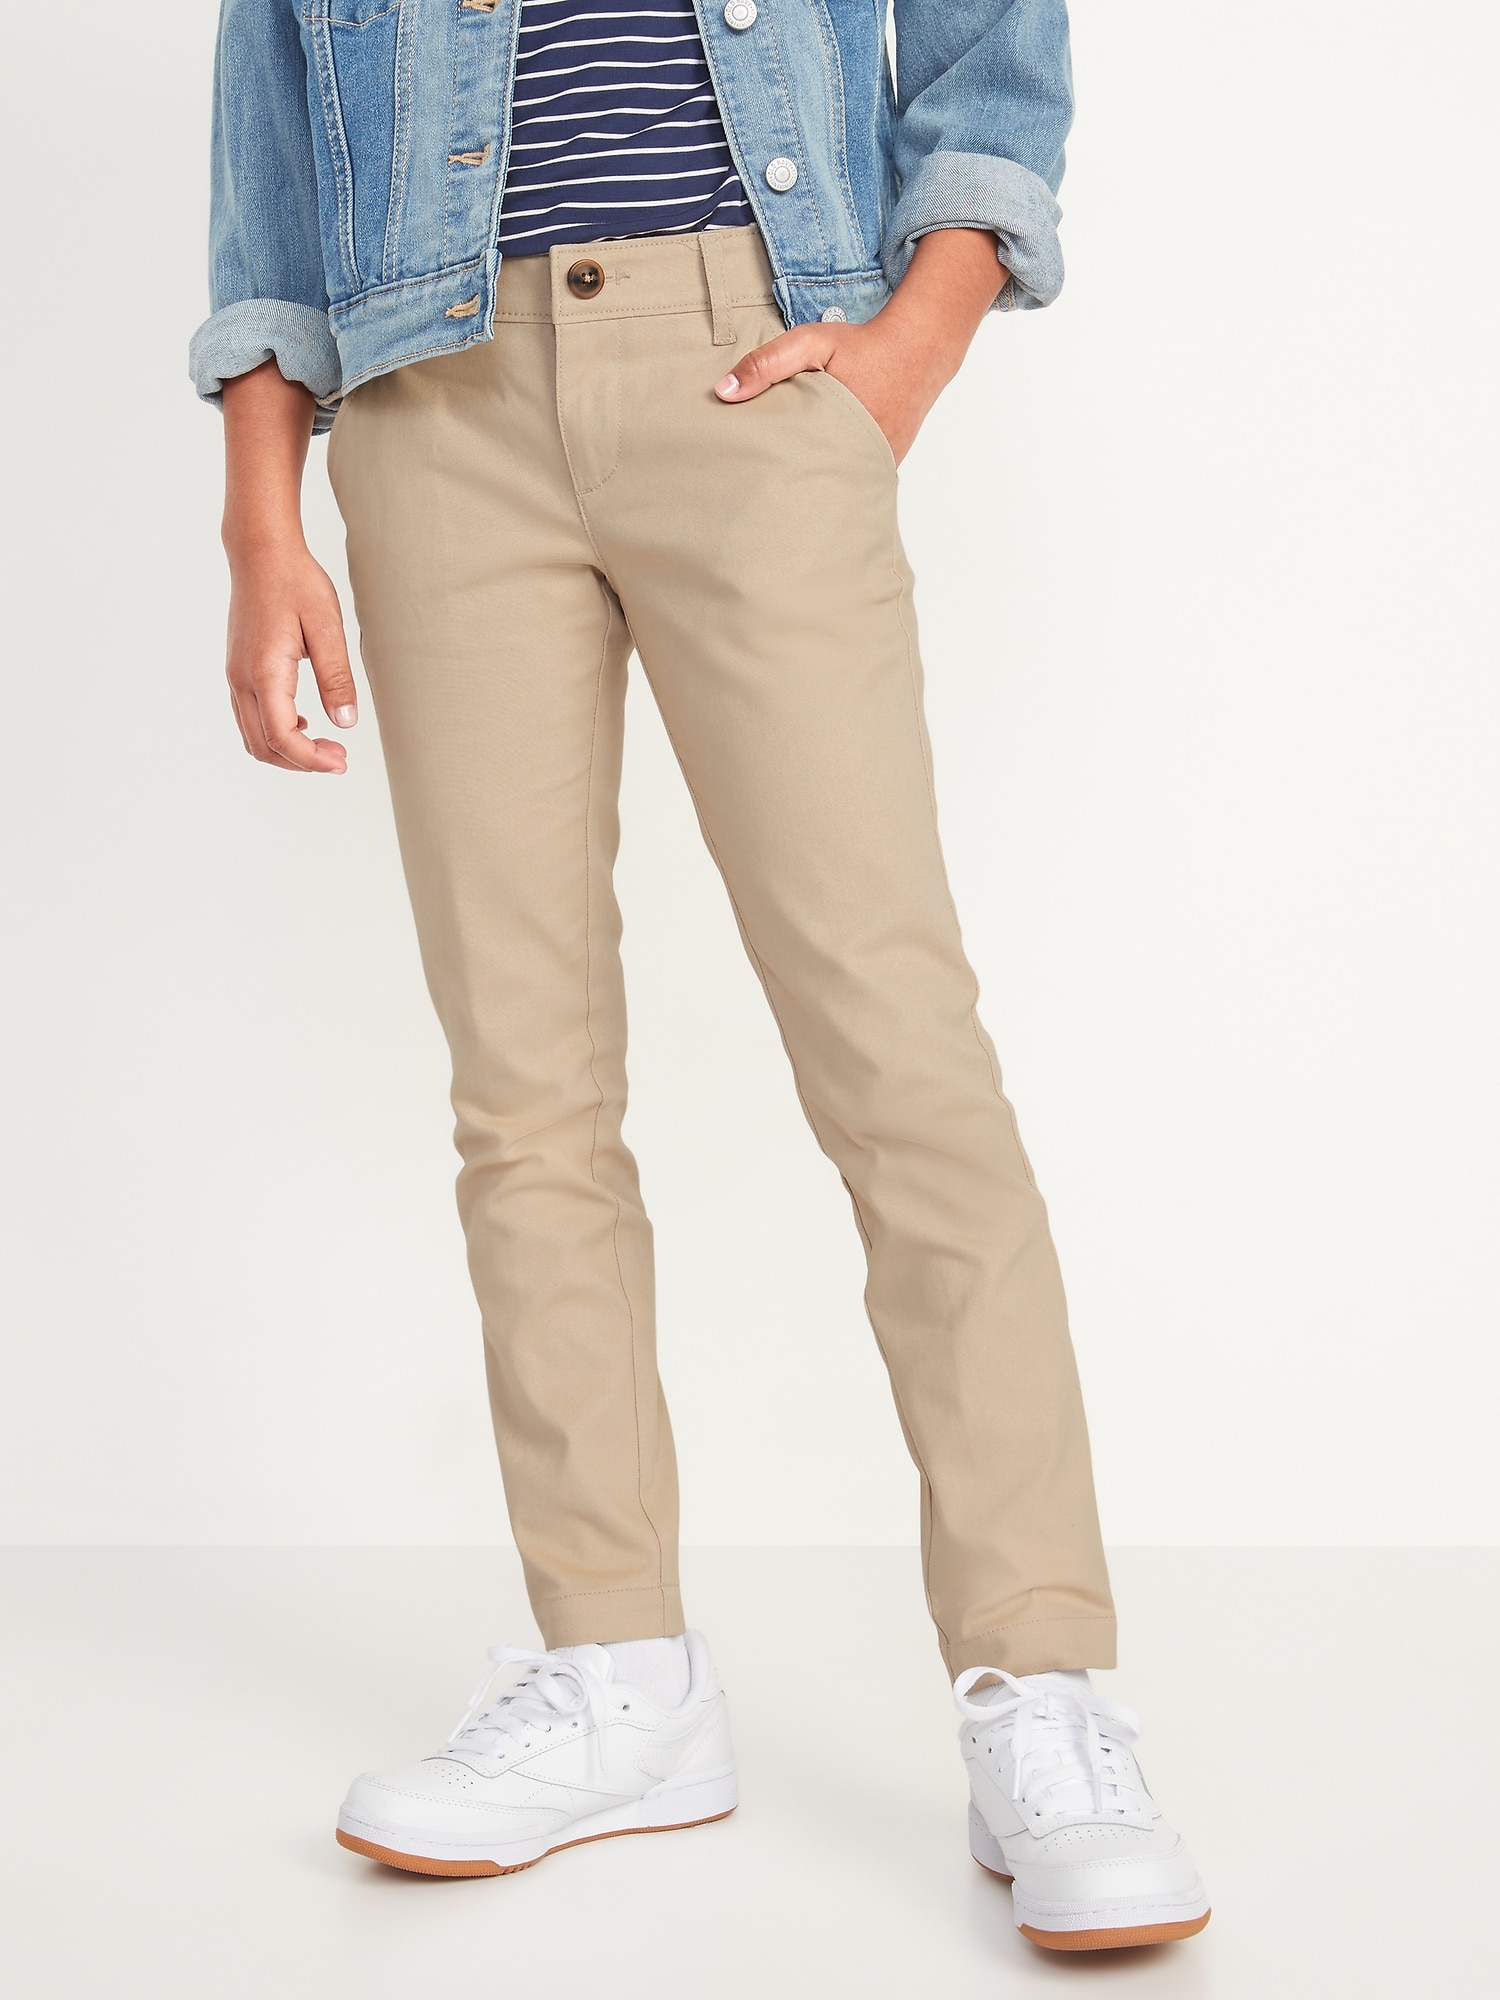 School Uniforms Juniors Everyday Skinny Pants-Flat Front with Stretch  Fabric. Slim and Sleek. Modern Fit for an Excellent Fit